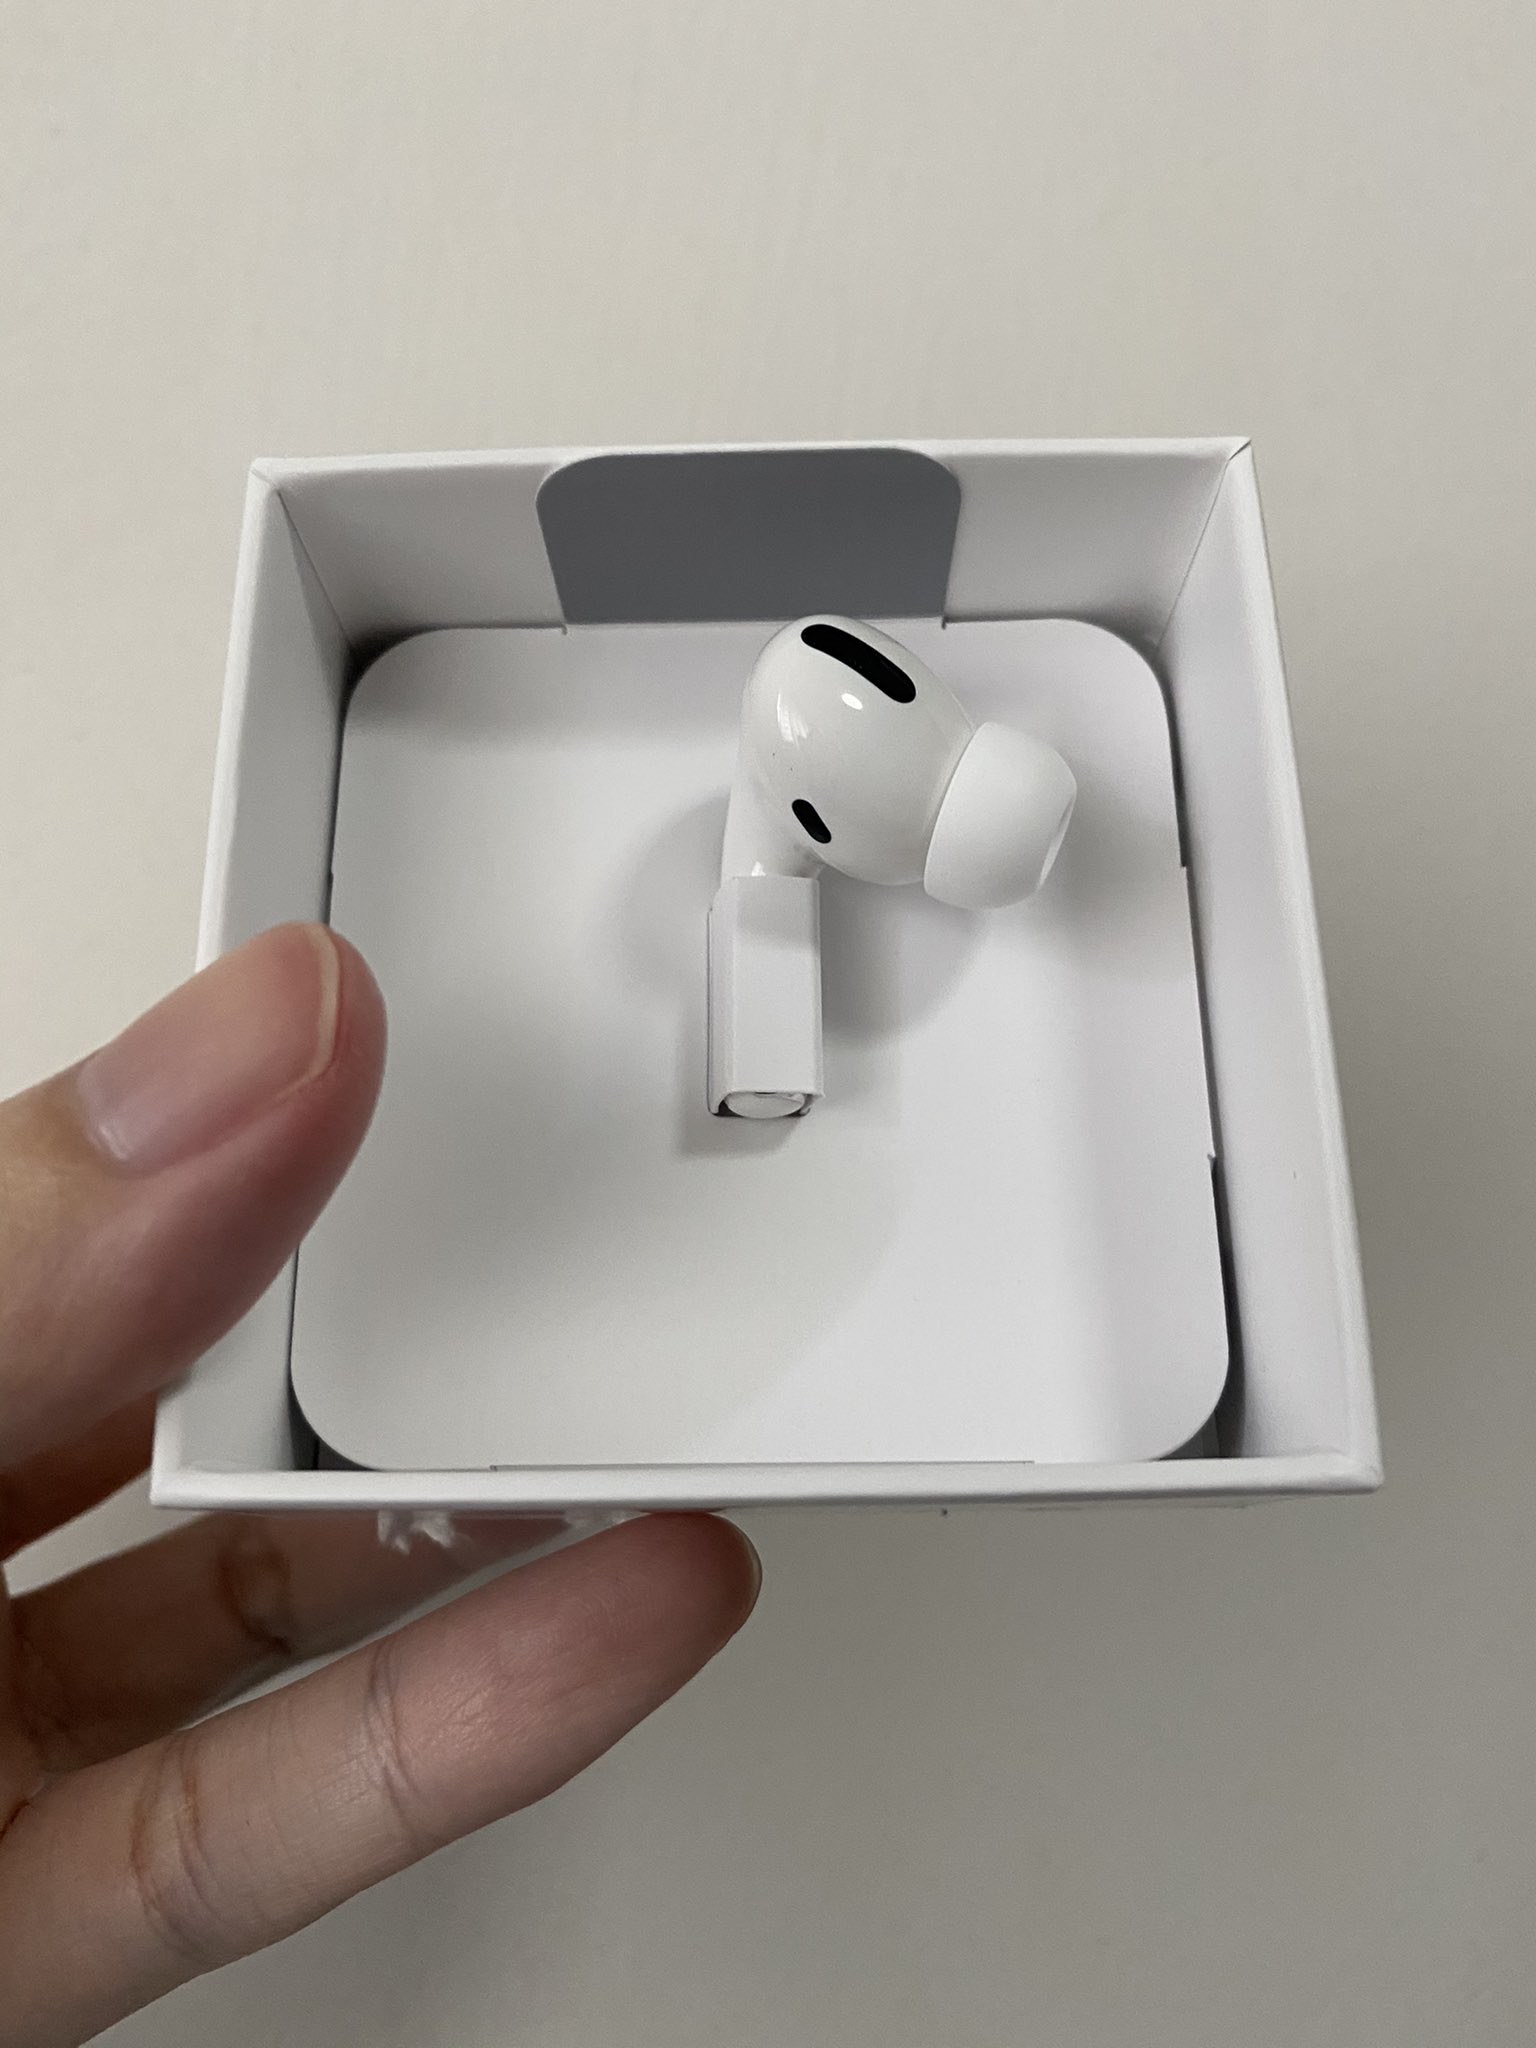 left airpod pro replacement